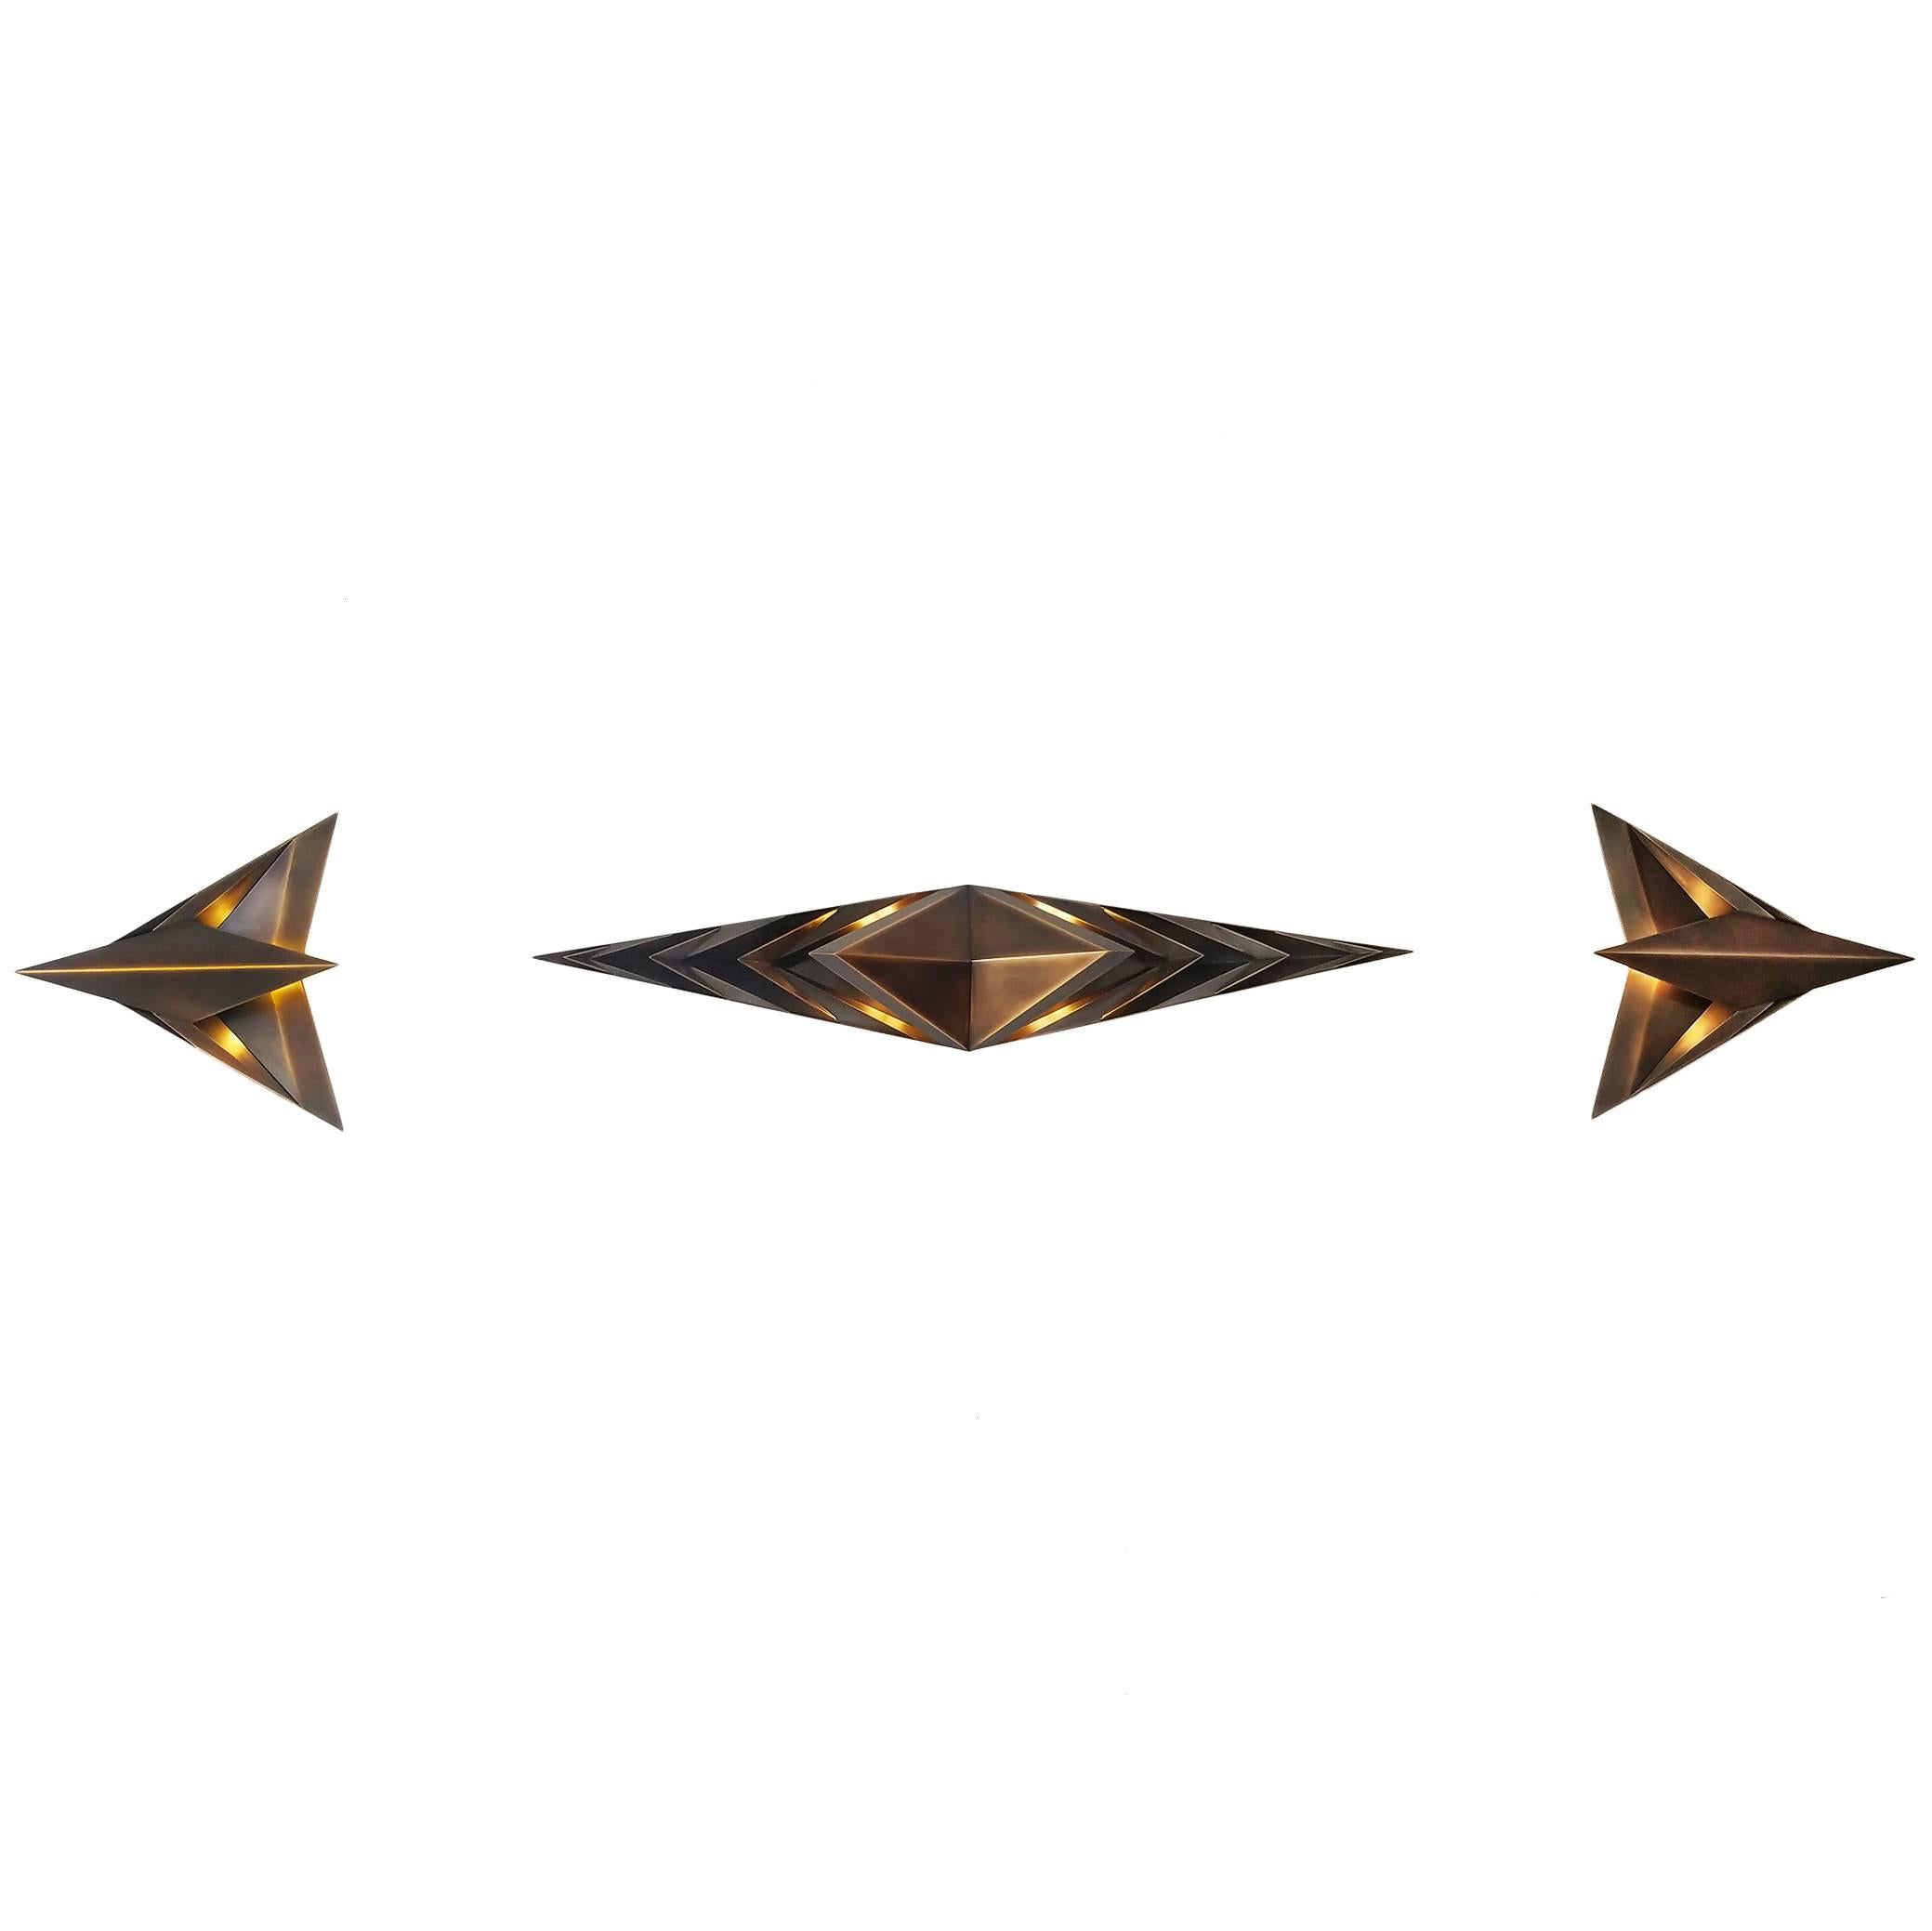 Parenthetical Light, Bronze Wall Sconce Trio by Force/Collide